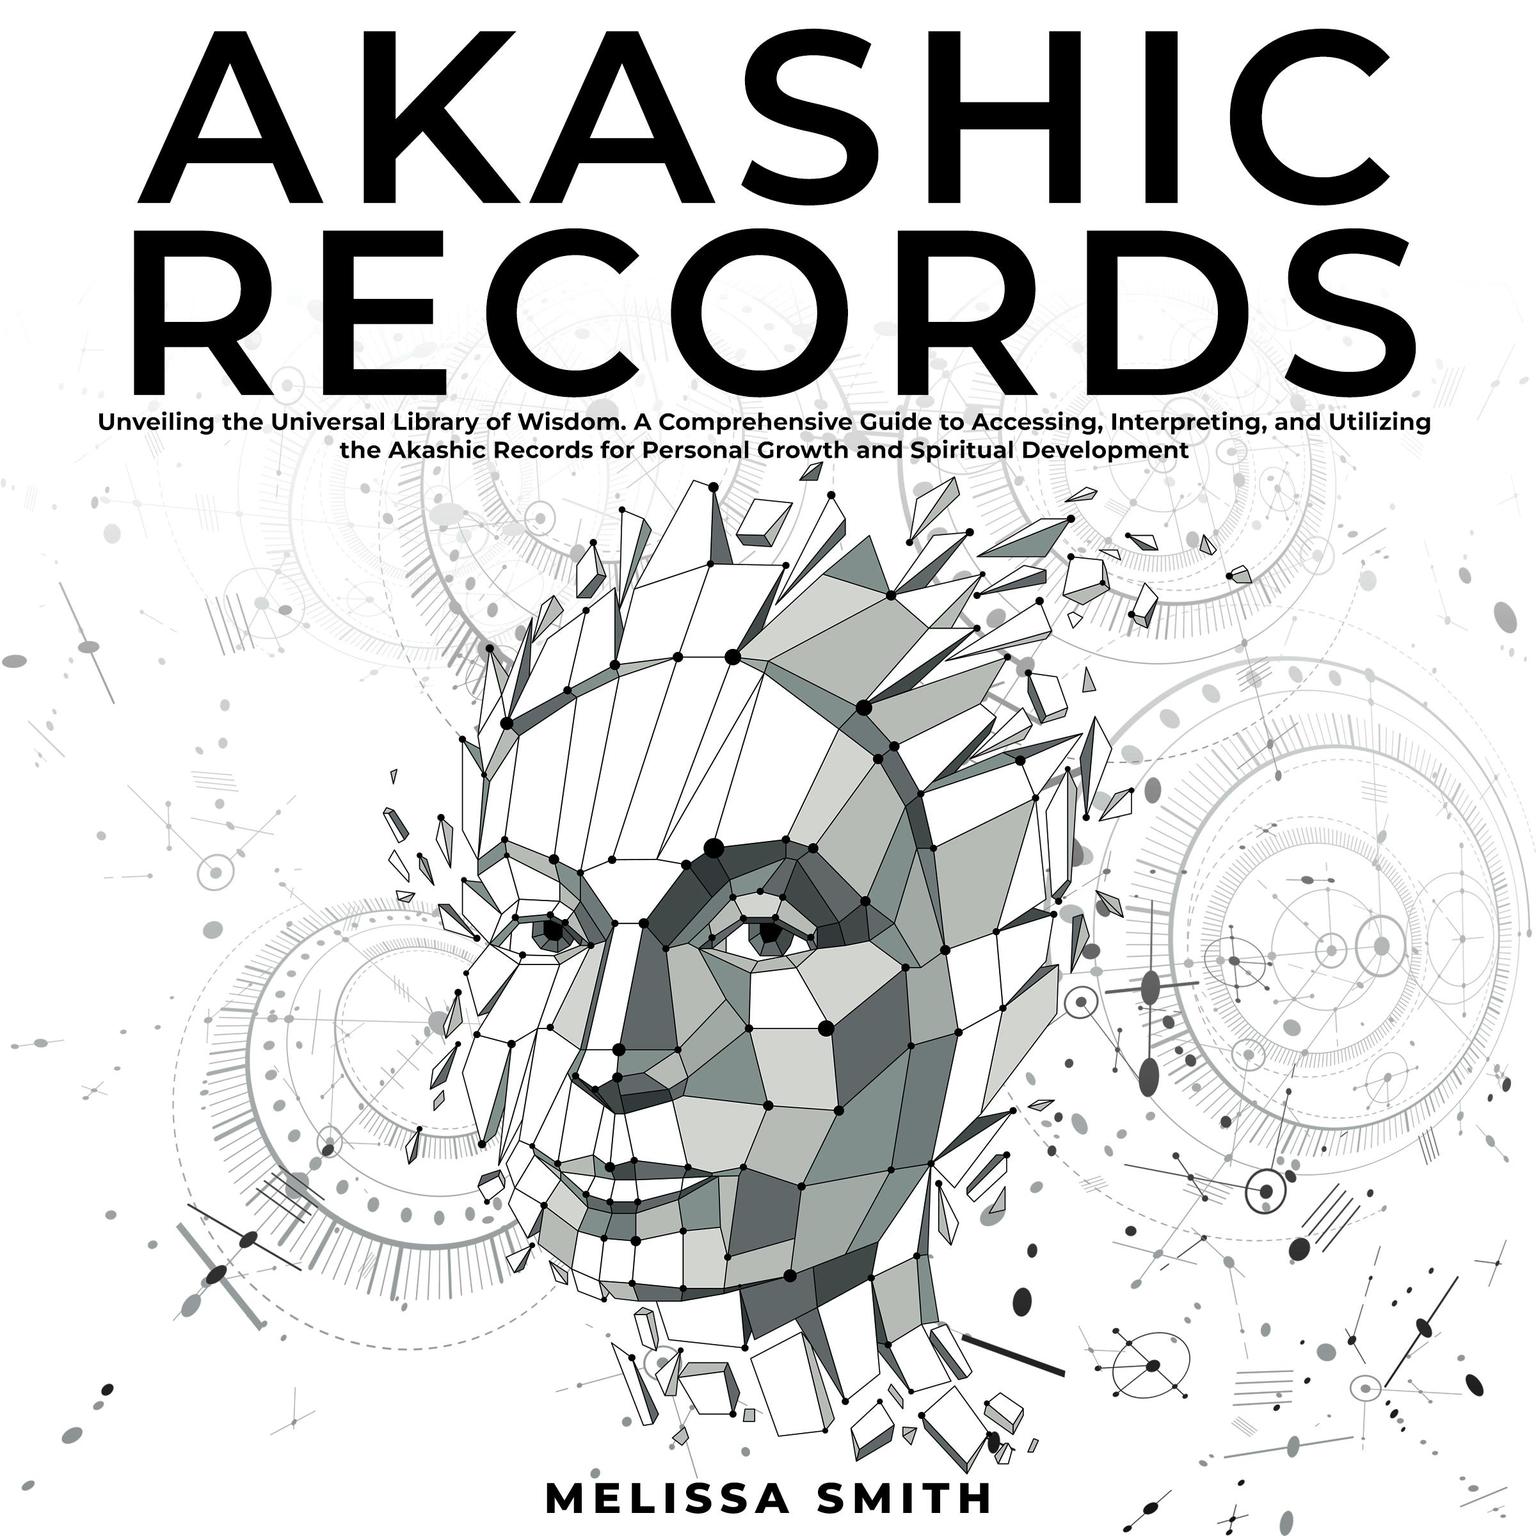 Akashic Records: Unveiling the Universal Library of Wisdom. A Comprehensive Guide to Accessing, Interpreting, and Utilizing the Akashic Records for Personal Growth and Spiritual Development Audiobook, by Melissa Smith